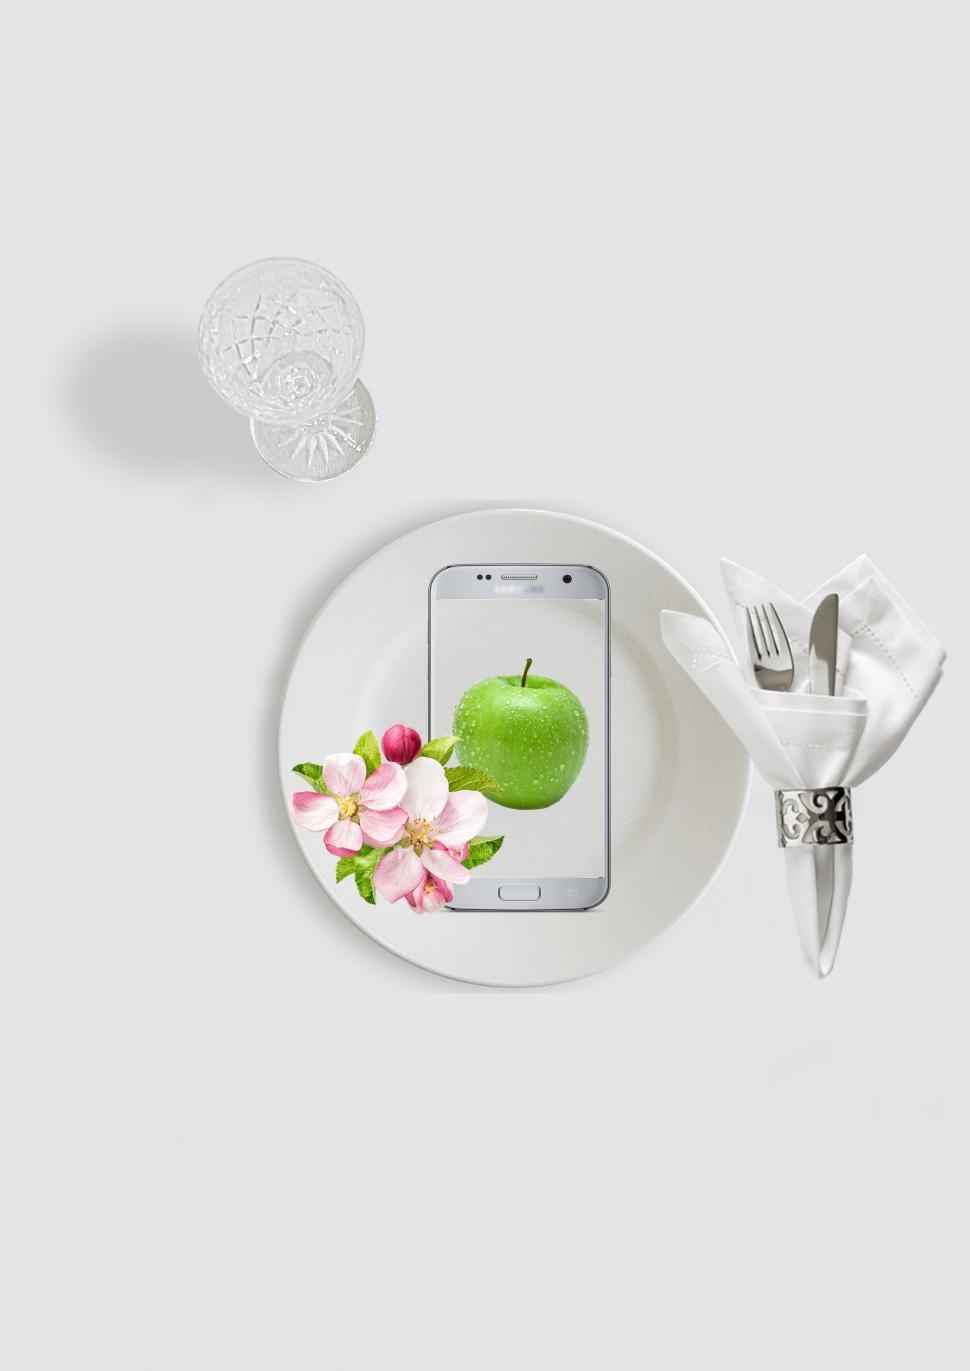 Free Image of Mobile Phone and Cutlery With Glass - Photomontage 